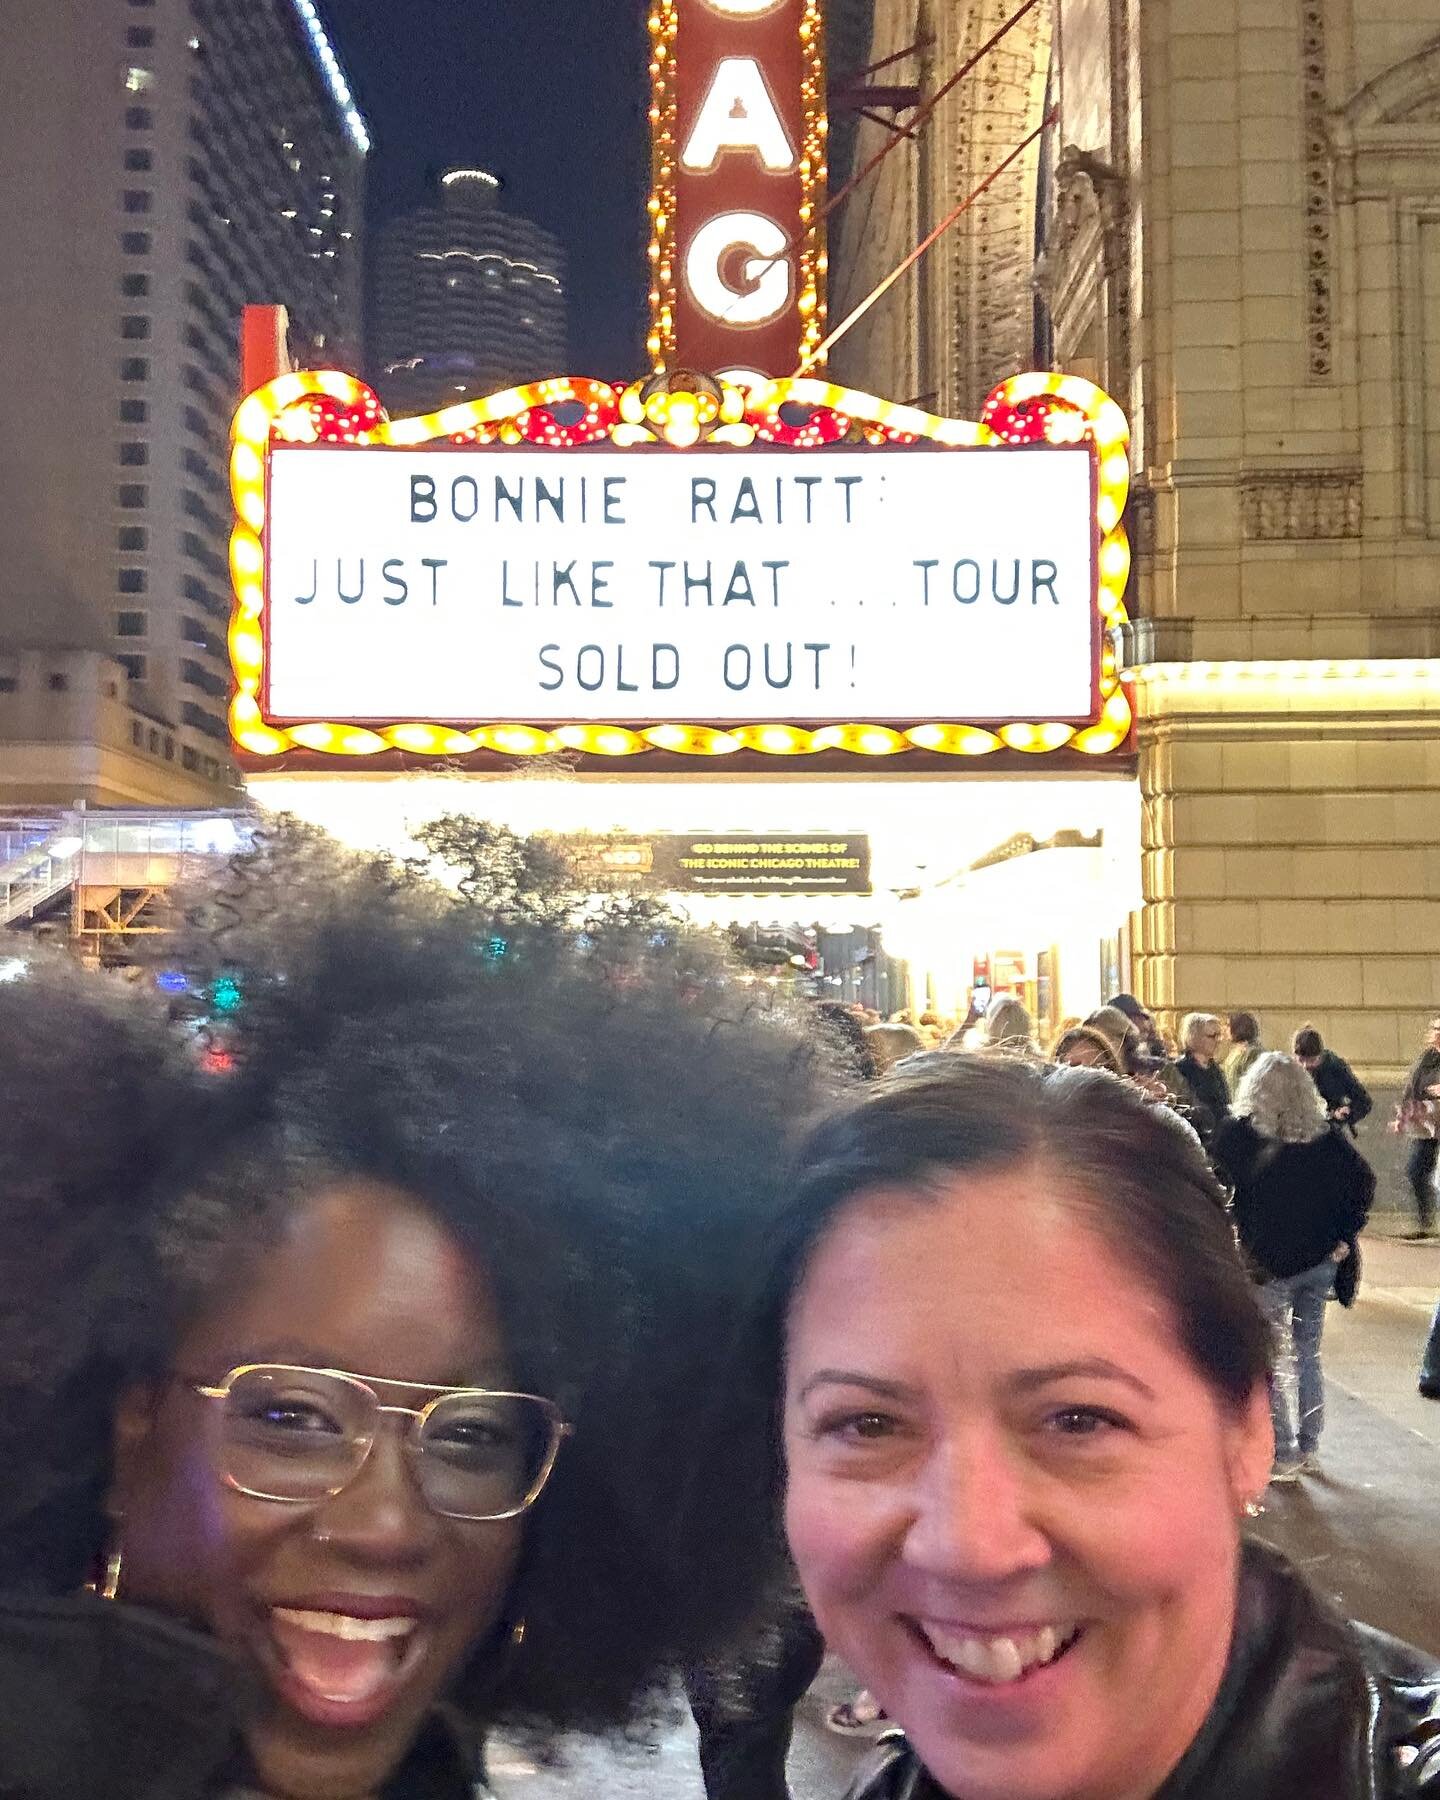 At the close of 2023&hellip;

Can&rsquo;t believe we got to see the legendary Bonnie Raitt in concert last month!  2023 has been an EPIC concert going year for me! She sang I Can&rsquo;t Make You Love Me&hellip;like, right there on the stage&hellip;i